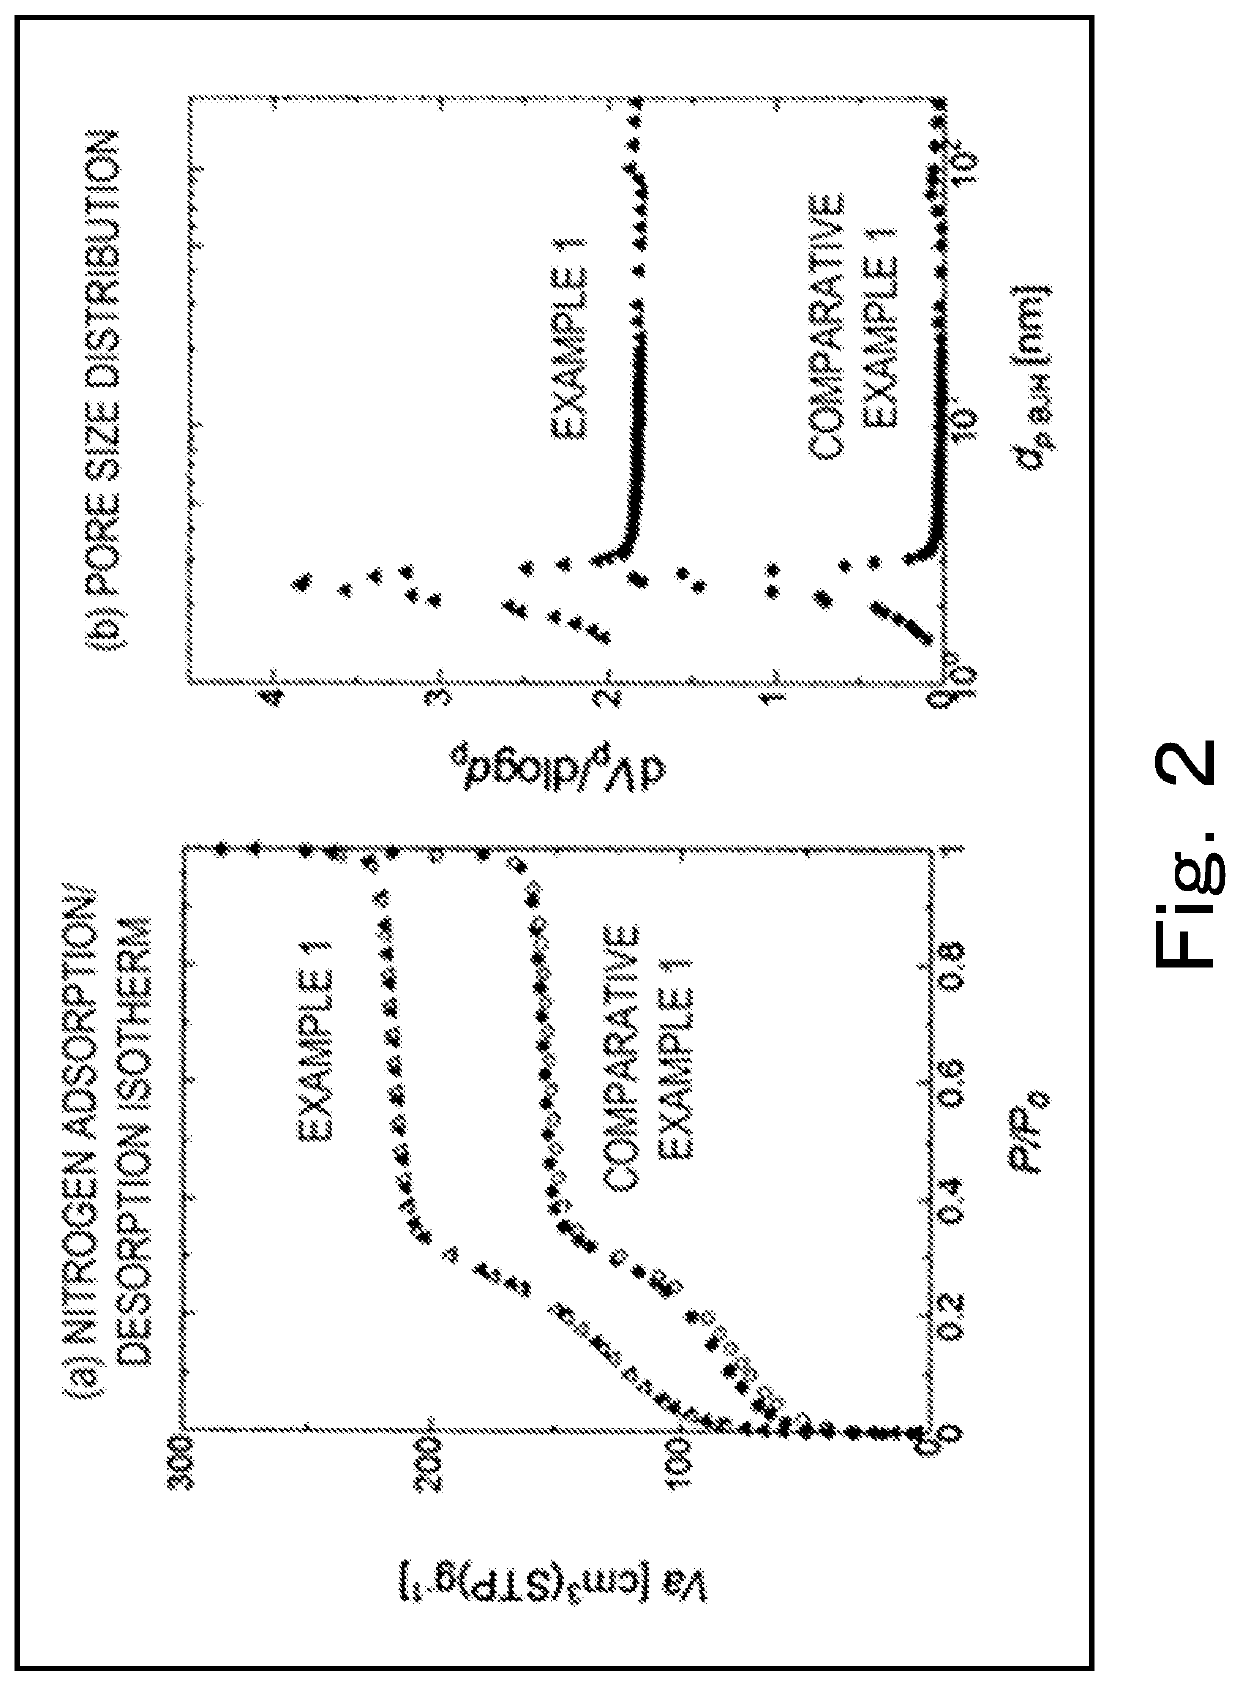 Method for producing core-shell porous silica particles